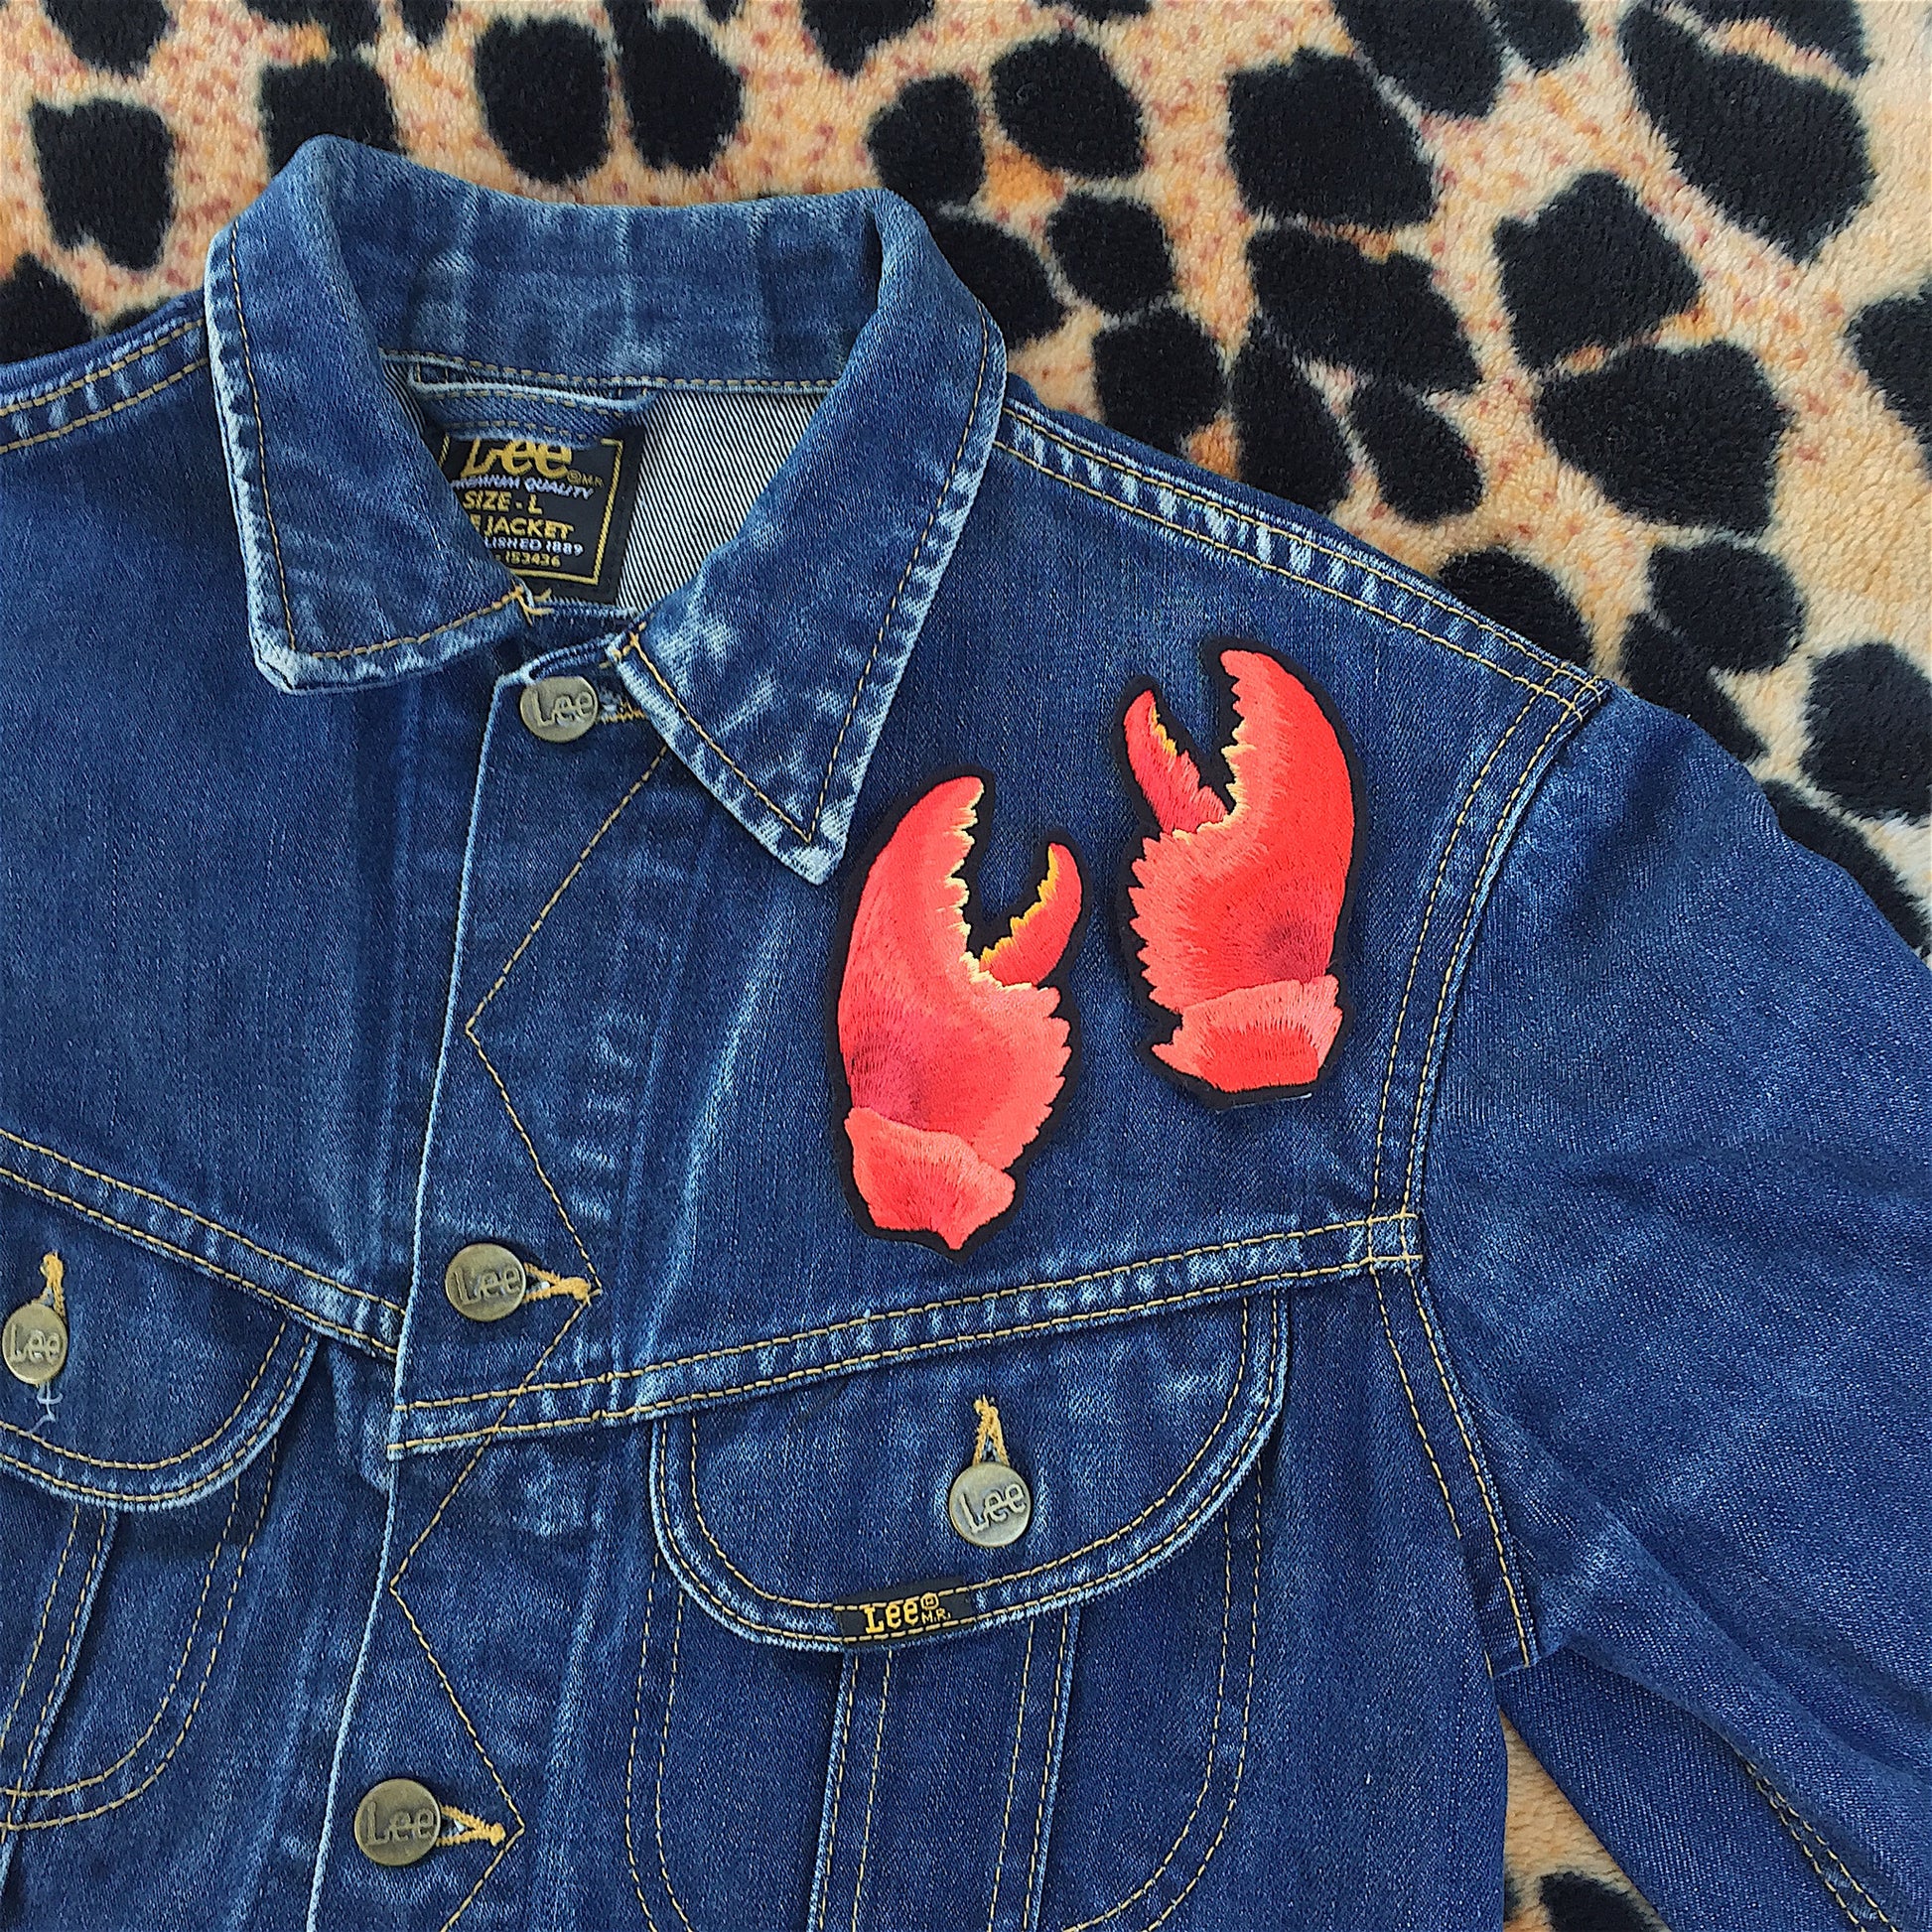 Pair of lobster claw embroidered patches shown on the front breast of a denim jacket